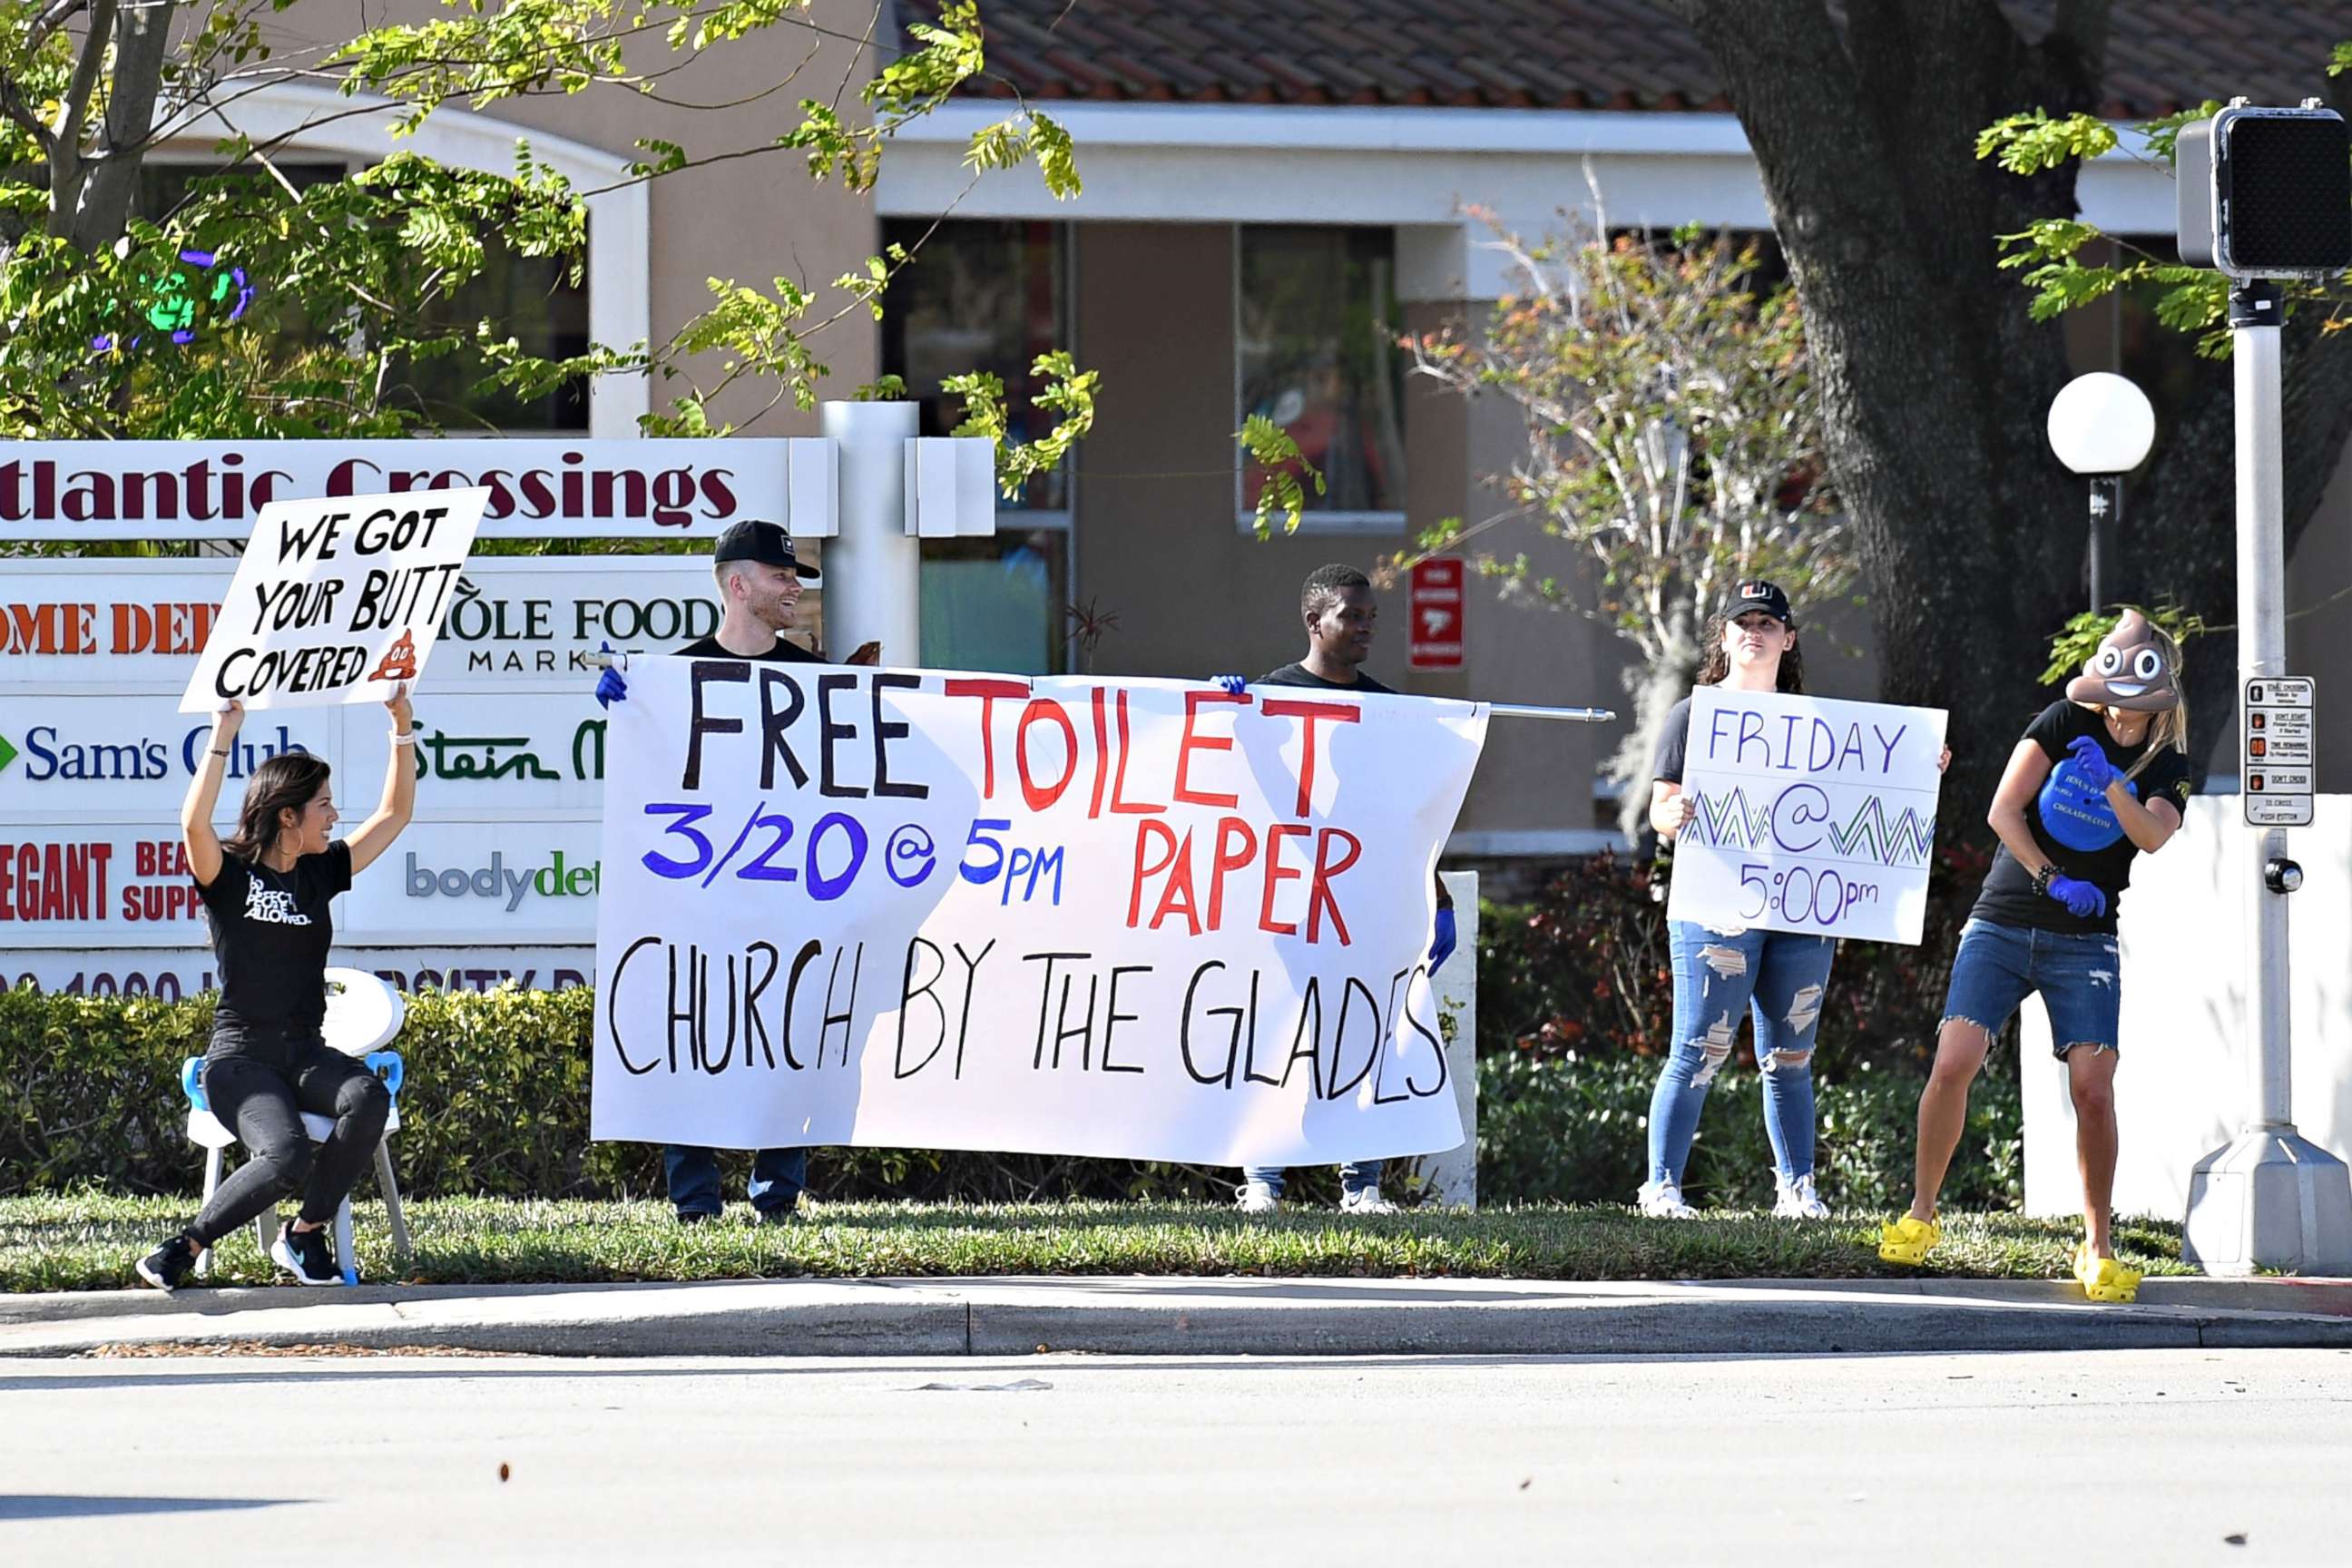 PHOTO: People offer free toilet paper in Coral Springs, Fla., Mar 19, 2020.